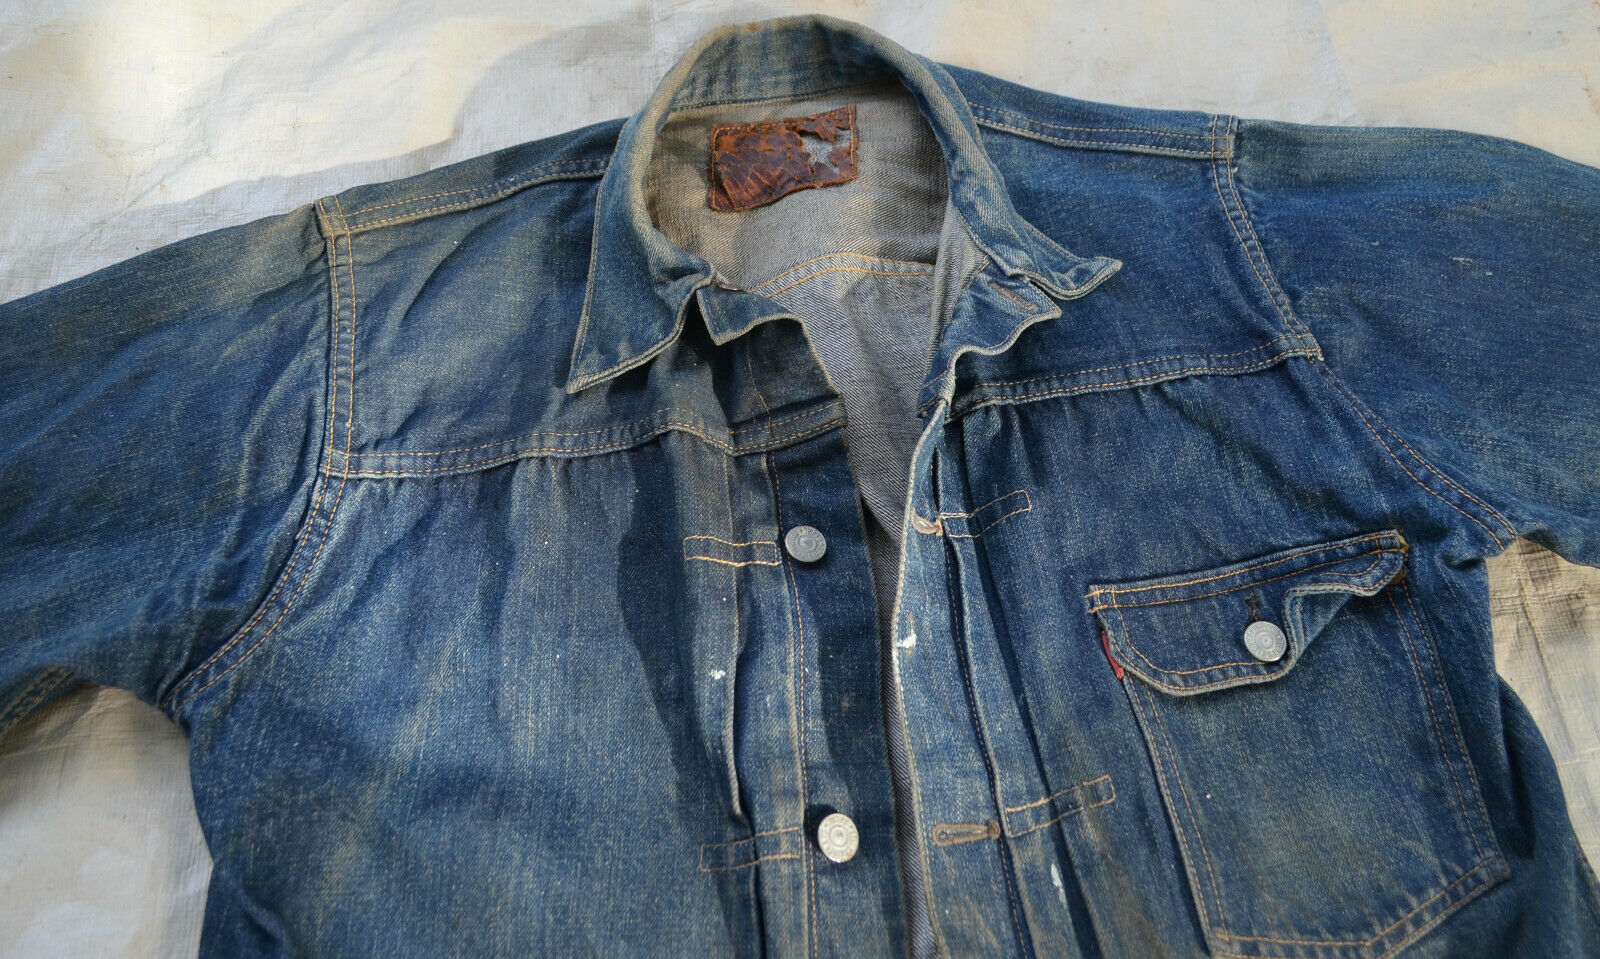 Denim-Jacket-Denim-On-Denim | Denim jacket, Jackets, Cool jackets for men